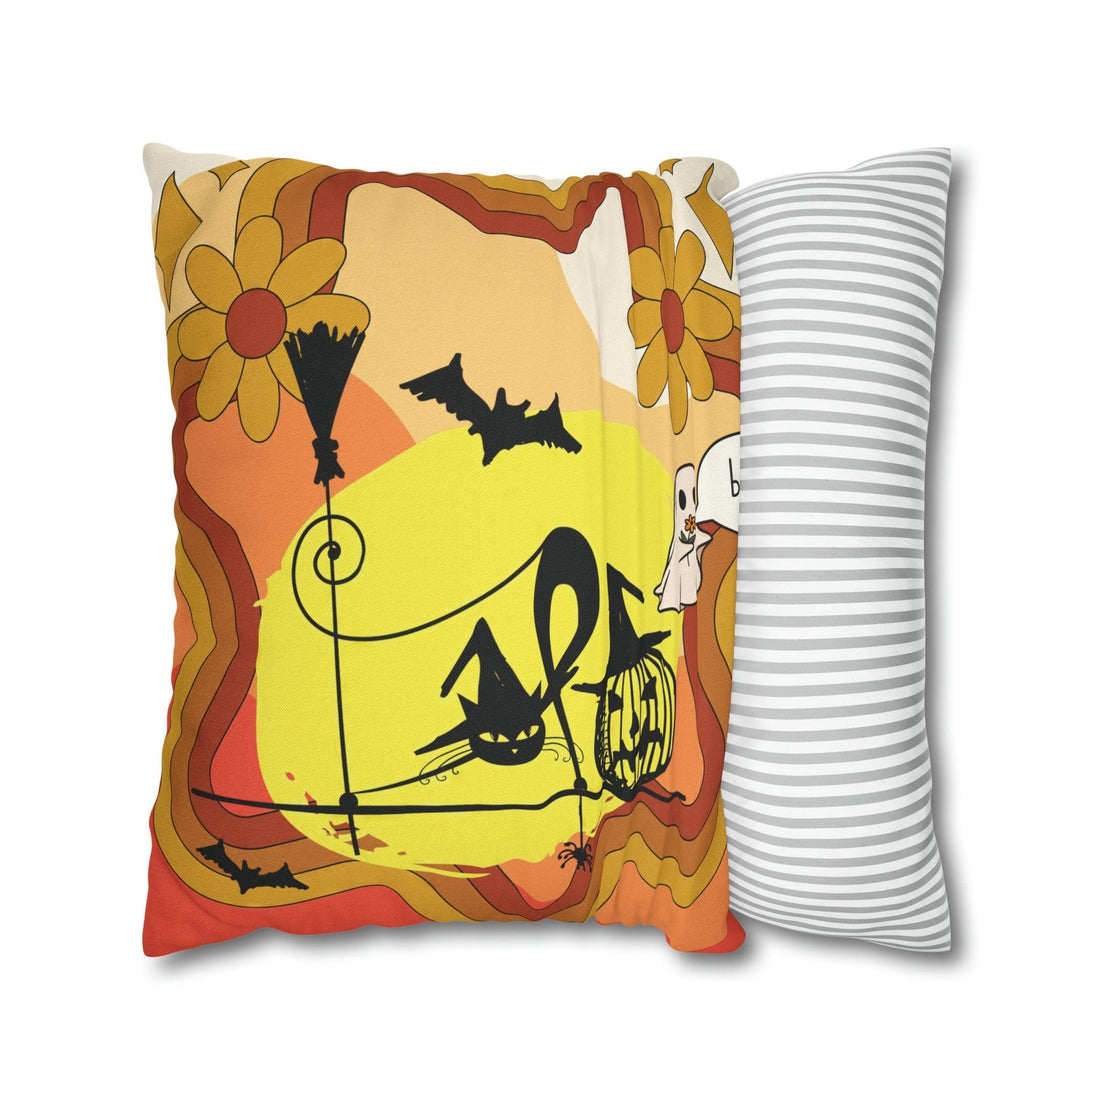 Kate McEnroe New York Atomic Kitschy Cat Halloween Pillow Cover, Retro Pumpkin, Bat Ghost Floral Holiday Cushion Covers, MCM Pillow CaseThrow Pillow Covers12140723276450021325